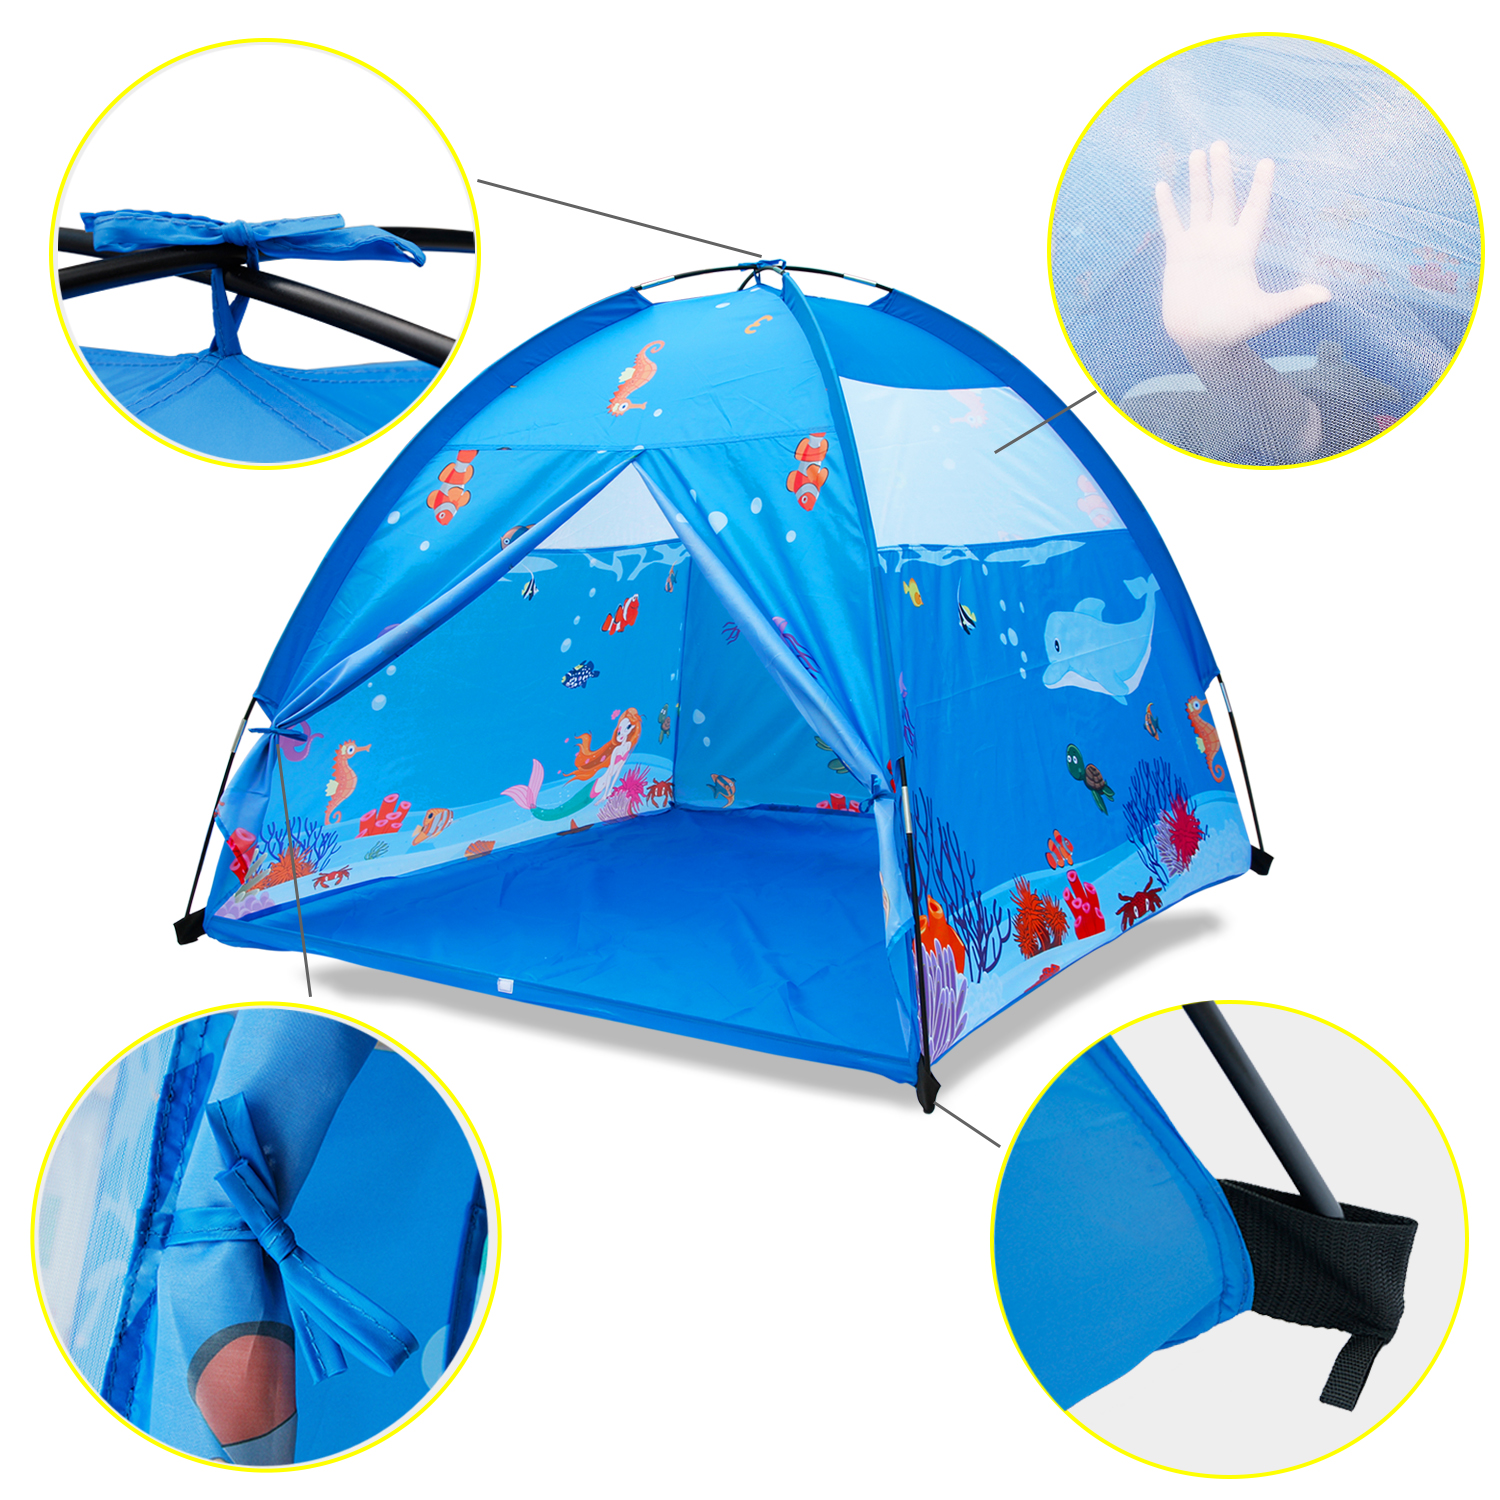 ALP Play Tent For Kids 150x150CM Dome Style Playhouse For Children Indoor Outdoor Ocean Sea World Pattern Toy For Boys and Girls Play At Christmas Day Beach Tent (Blue)  